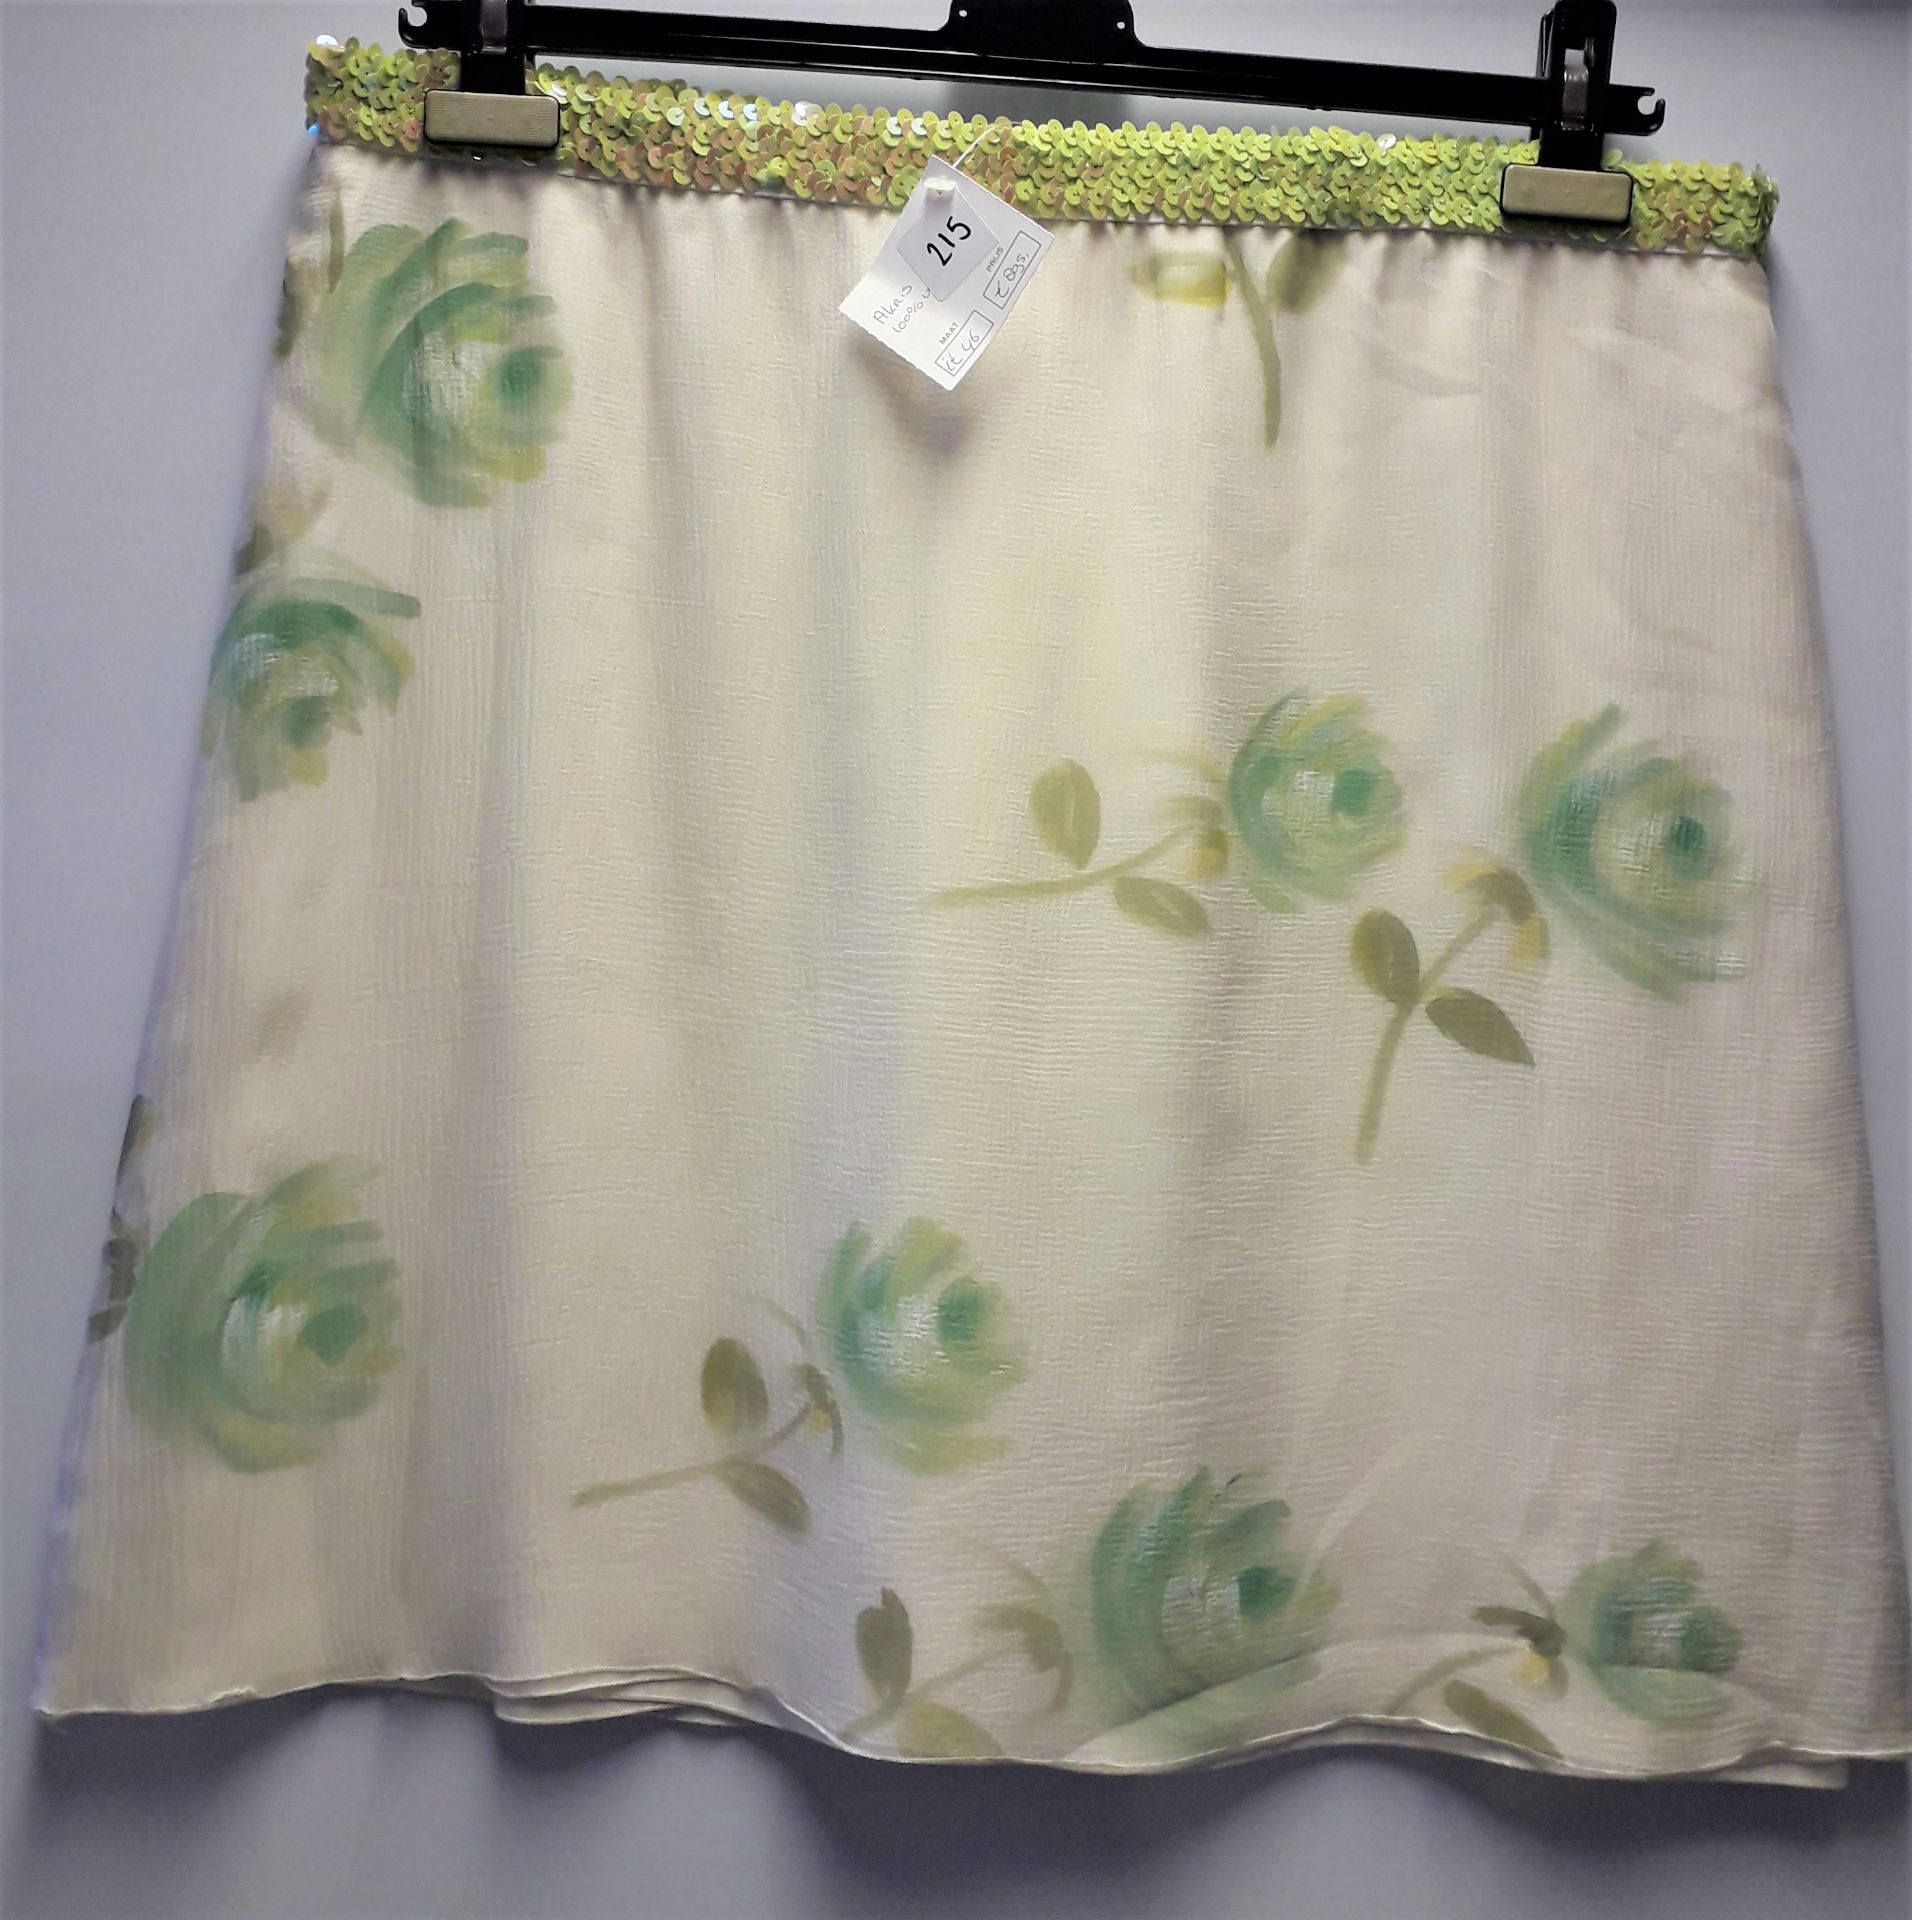 1 x Boutique Le Duc Cream Floral Skirt With Sequin Waistband - Size: 14 - Material: 100% Voilesoie - - Image 3 of 7